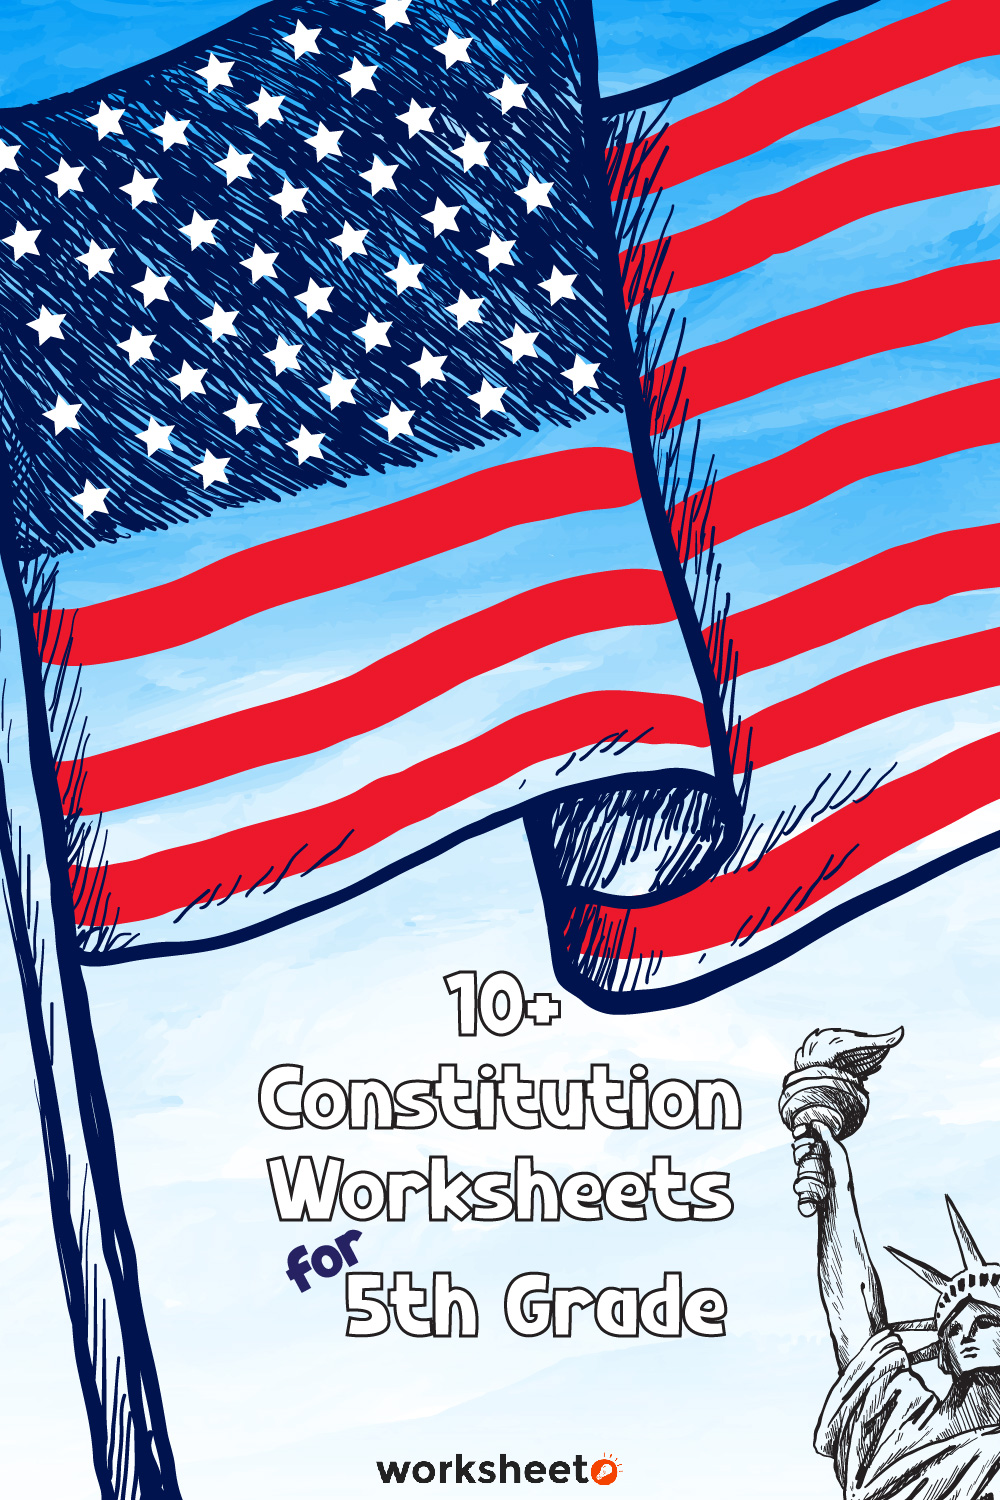 Constitution Worksheets for 5th Grade